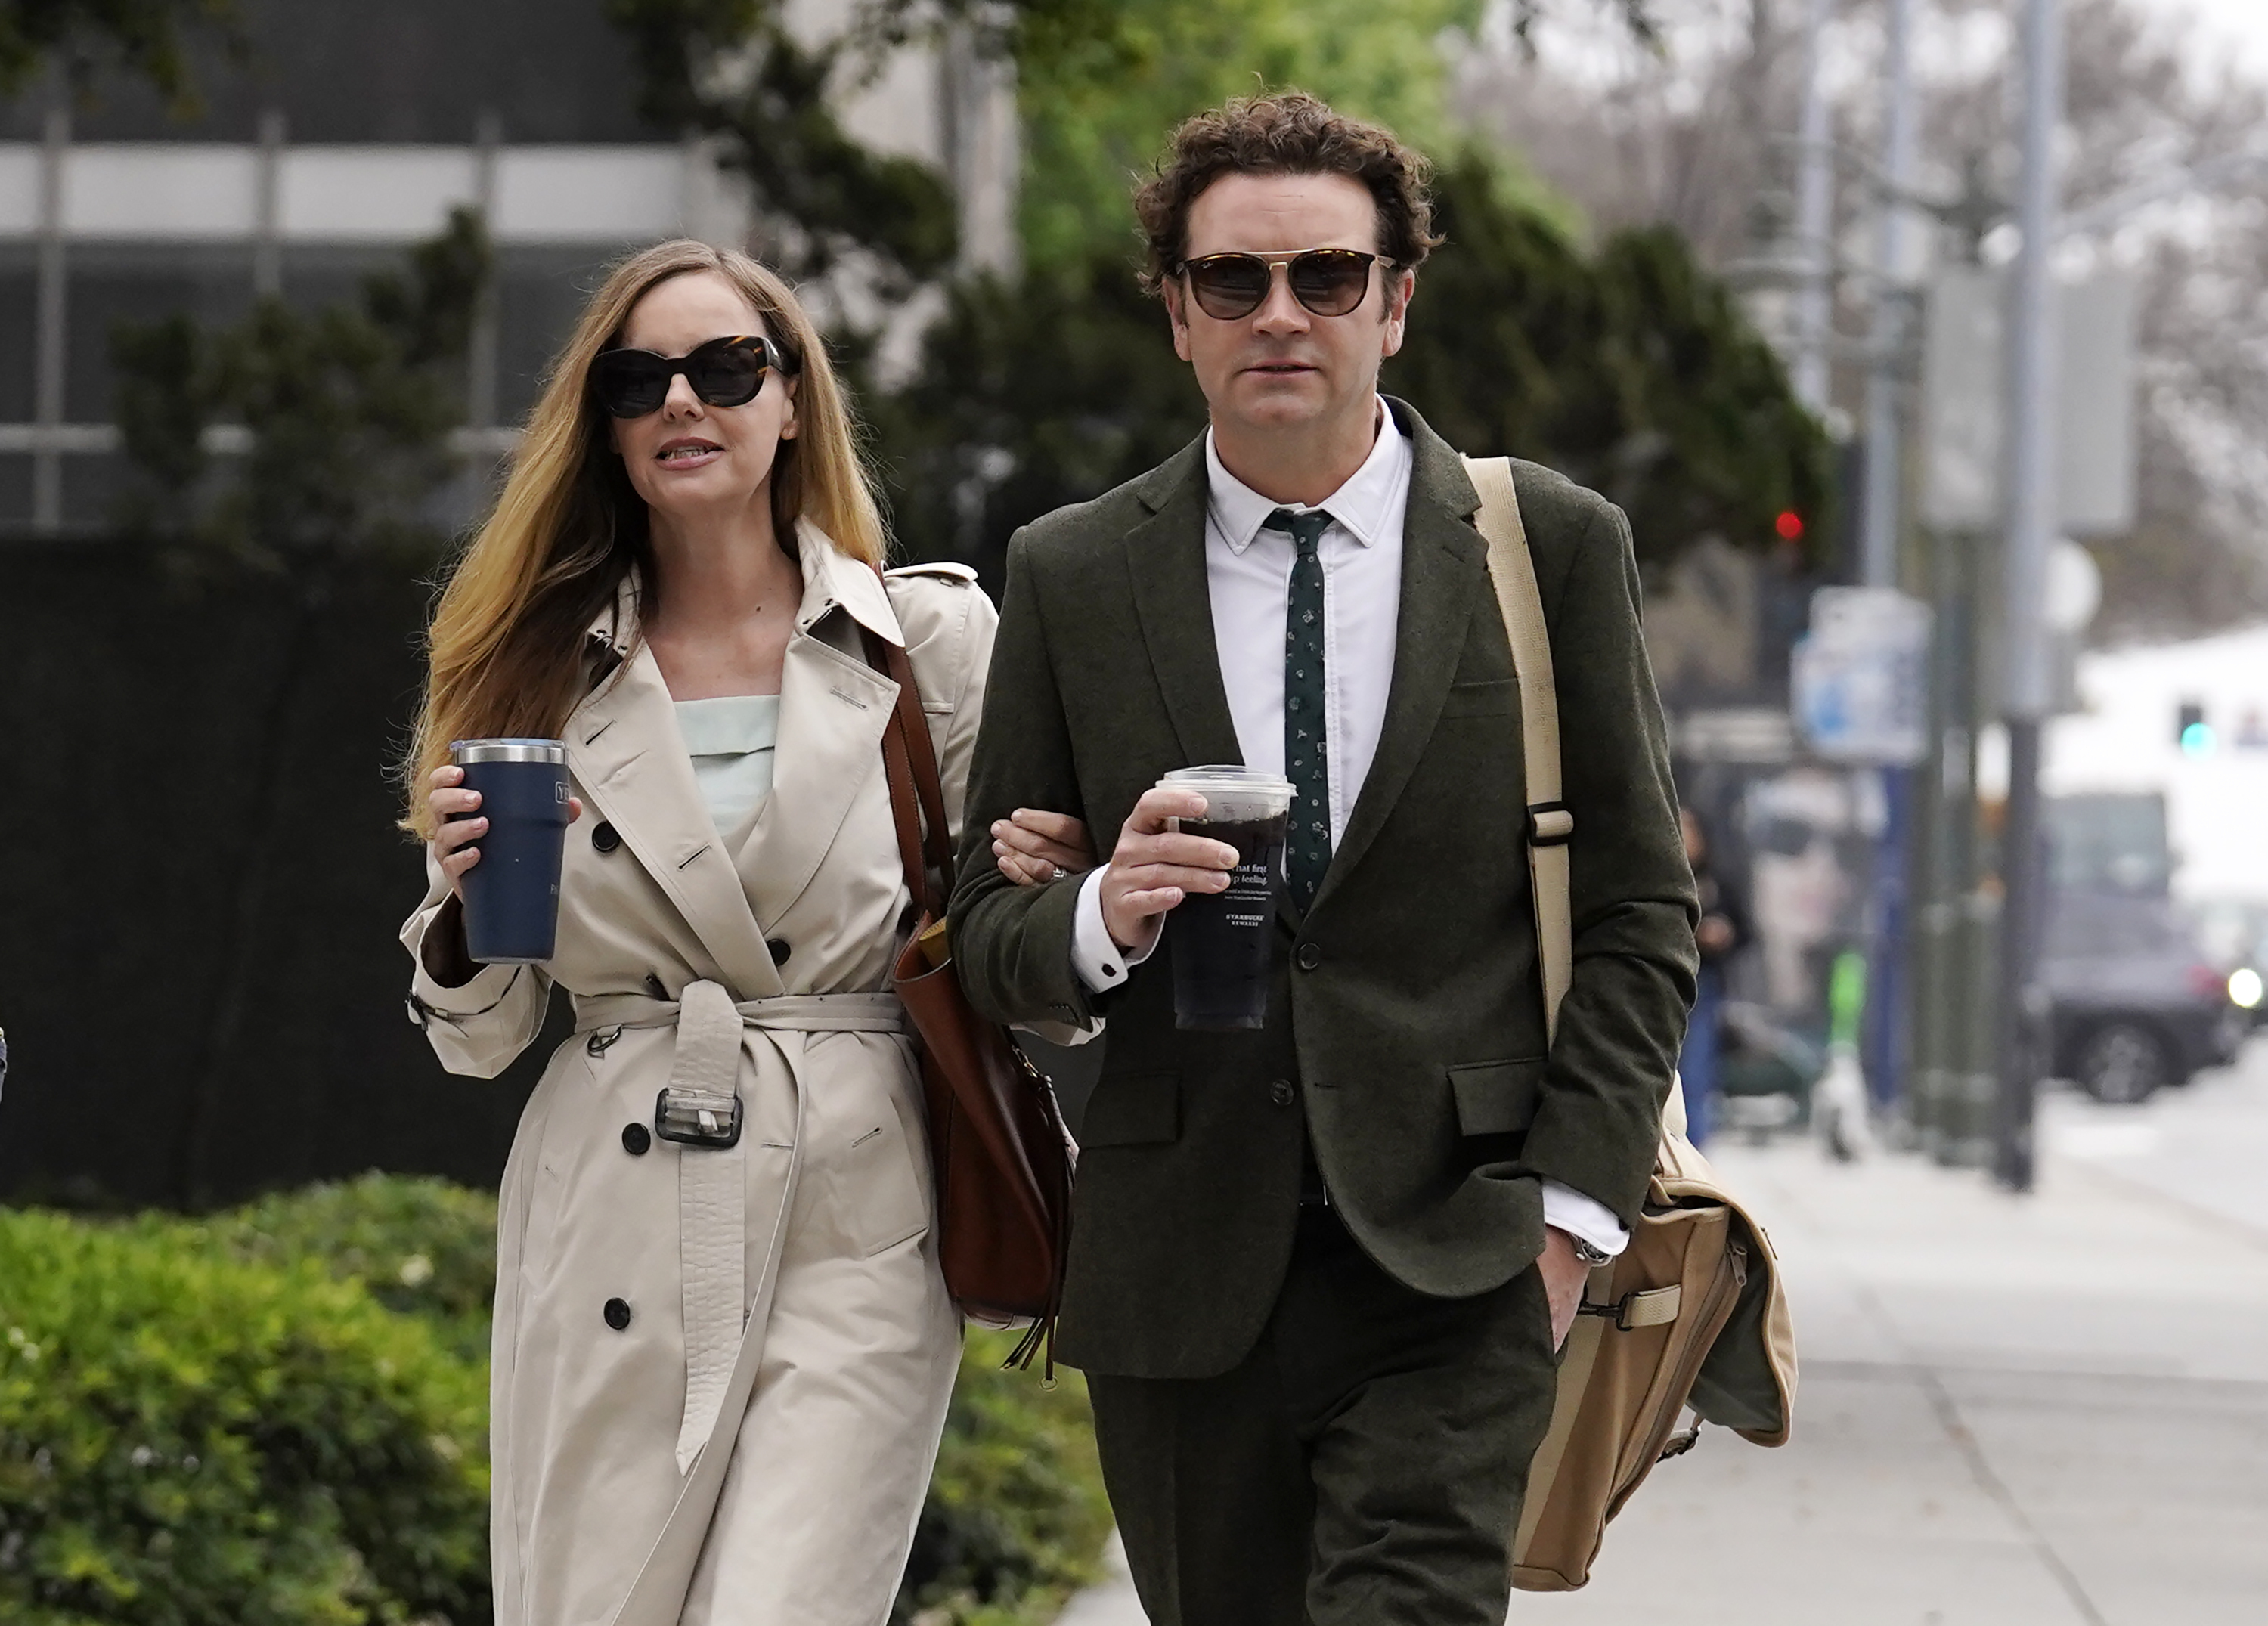 Danny Masterson and his wife Bijou Phillips walking into court